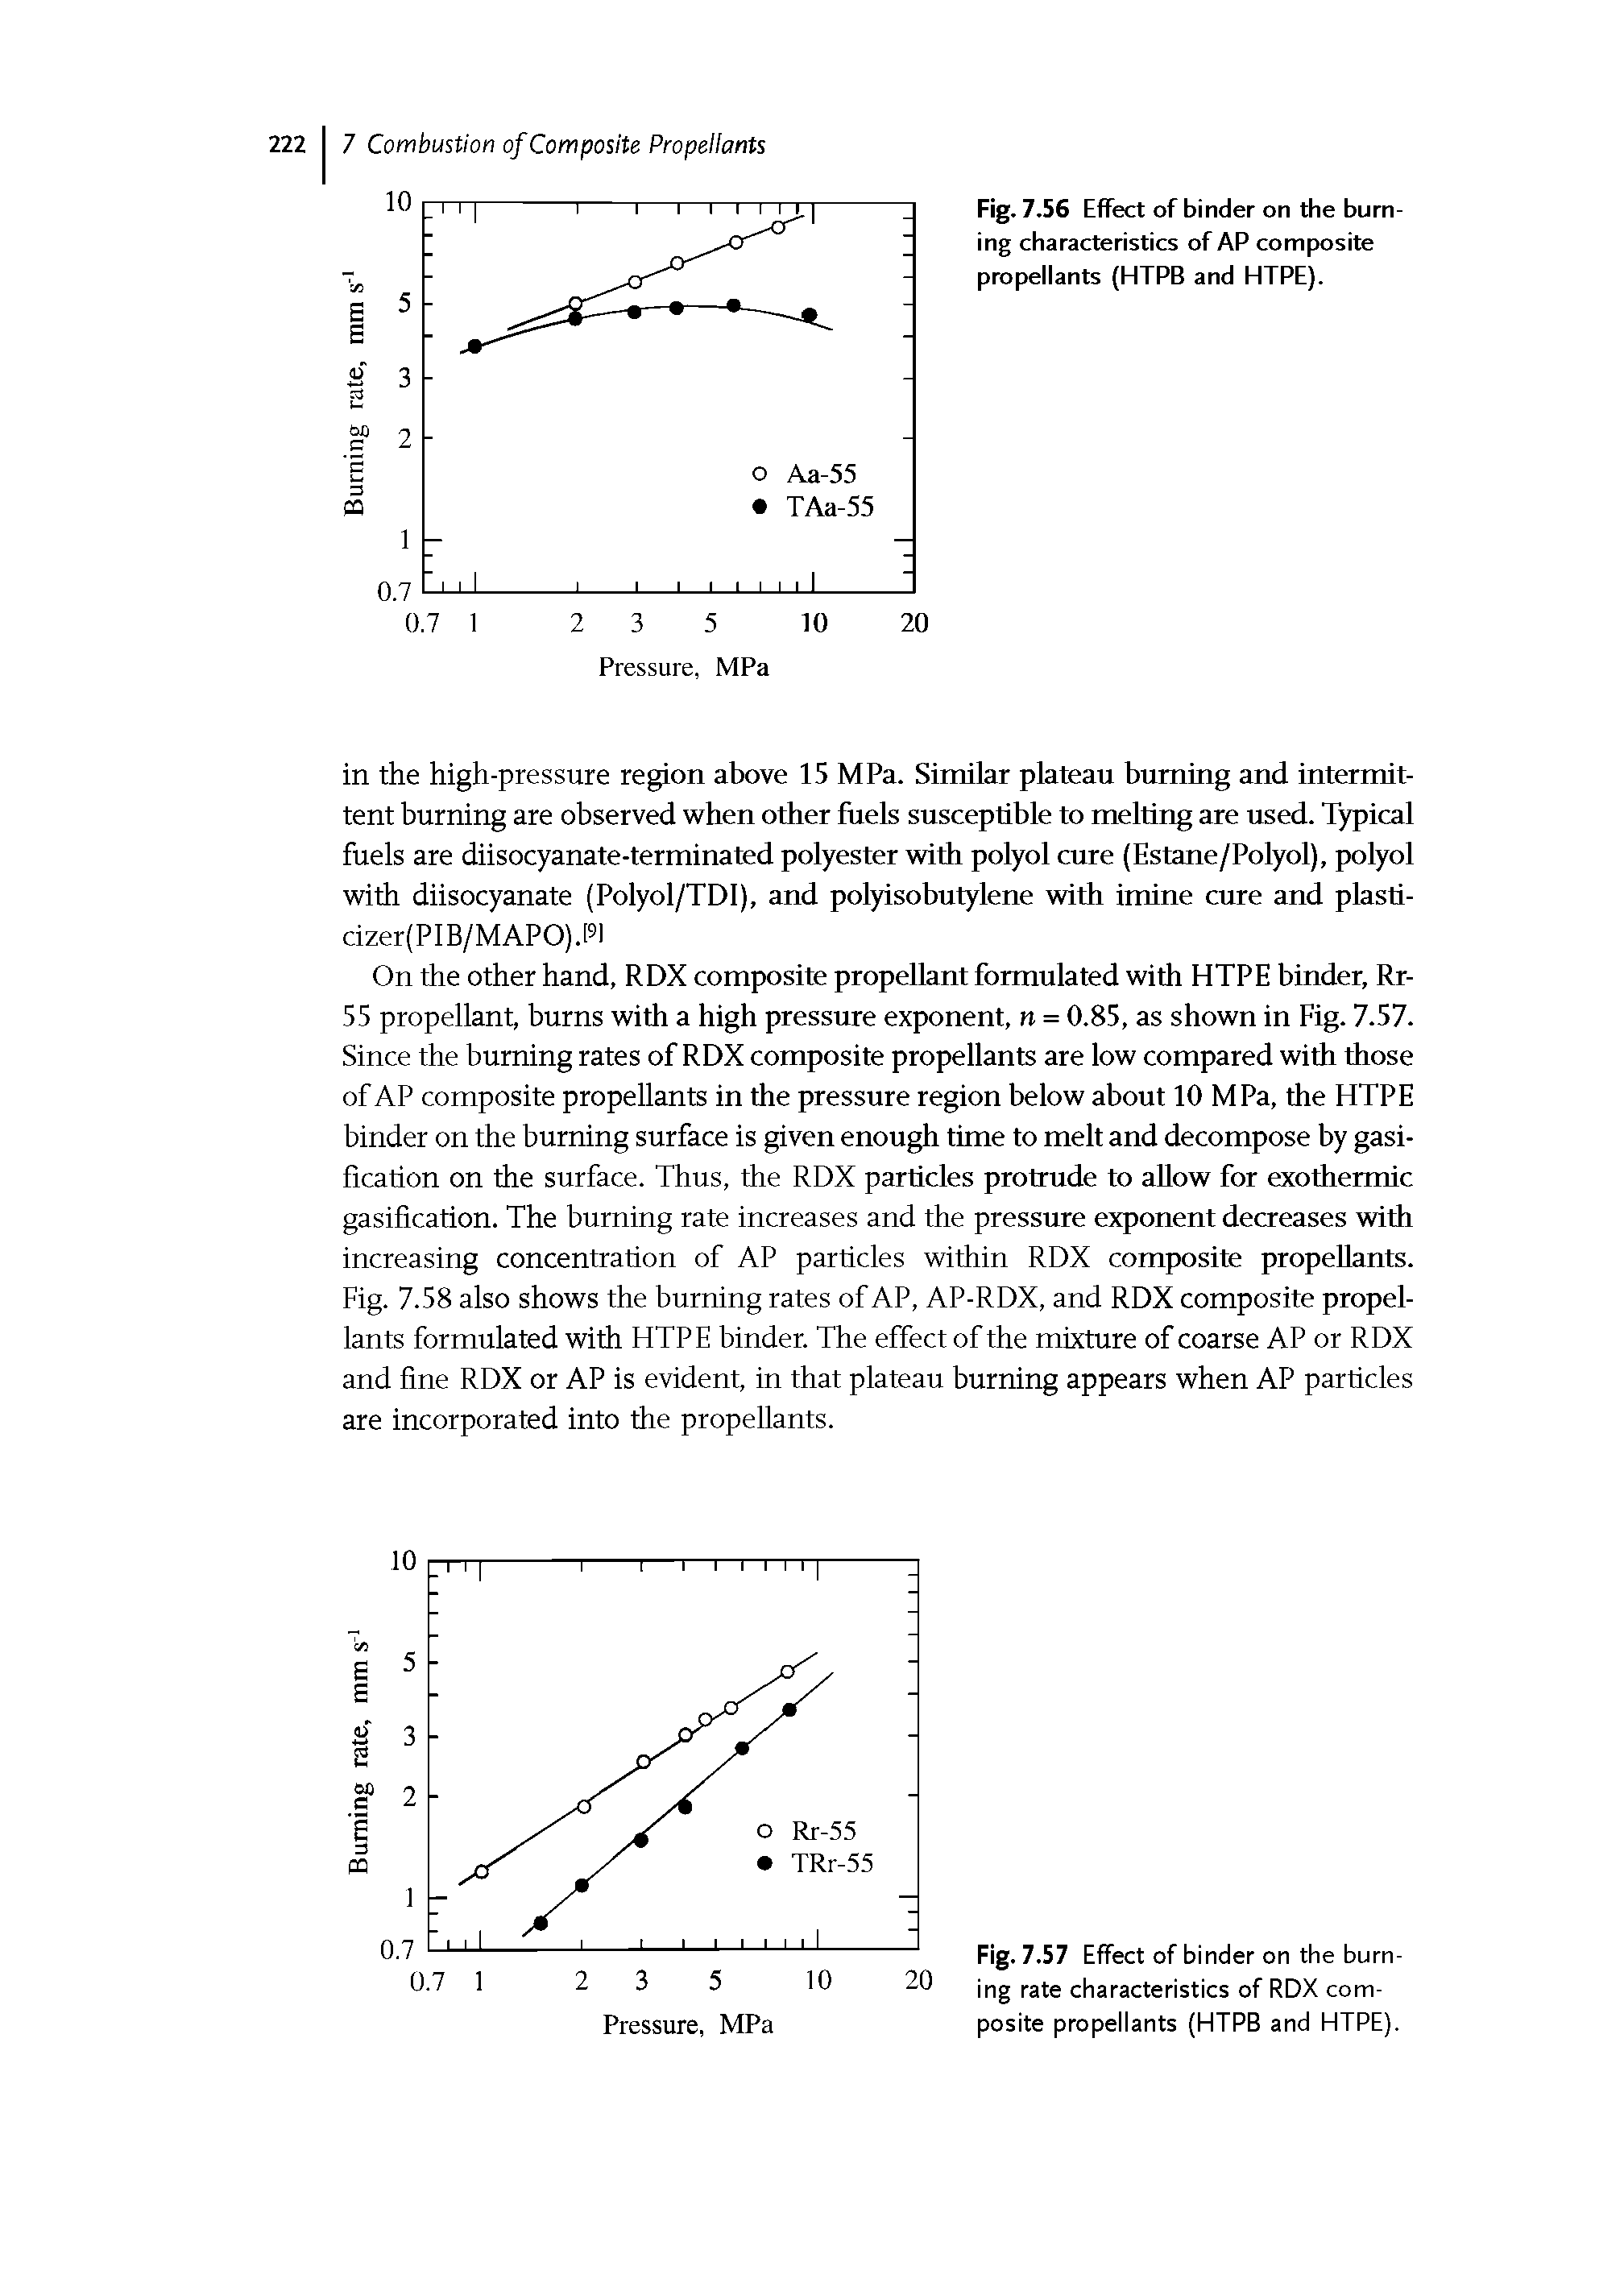 Fig. 7.57 Effect of binder on the burning rate characteristics of RDX composite propellants (HTPB and HTPE).